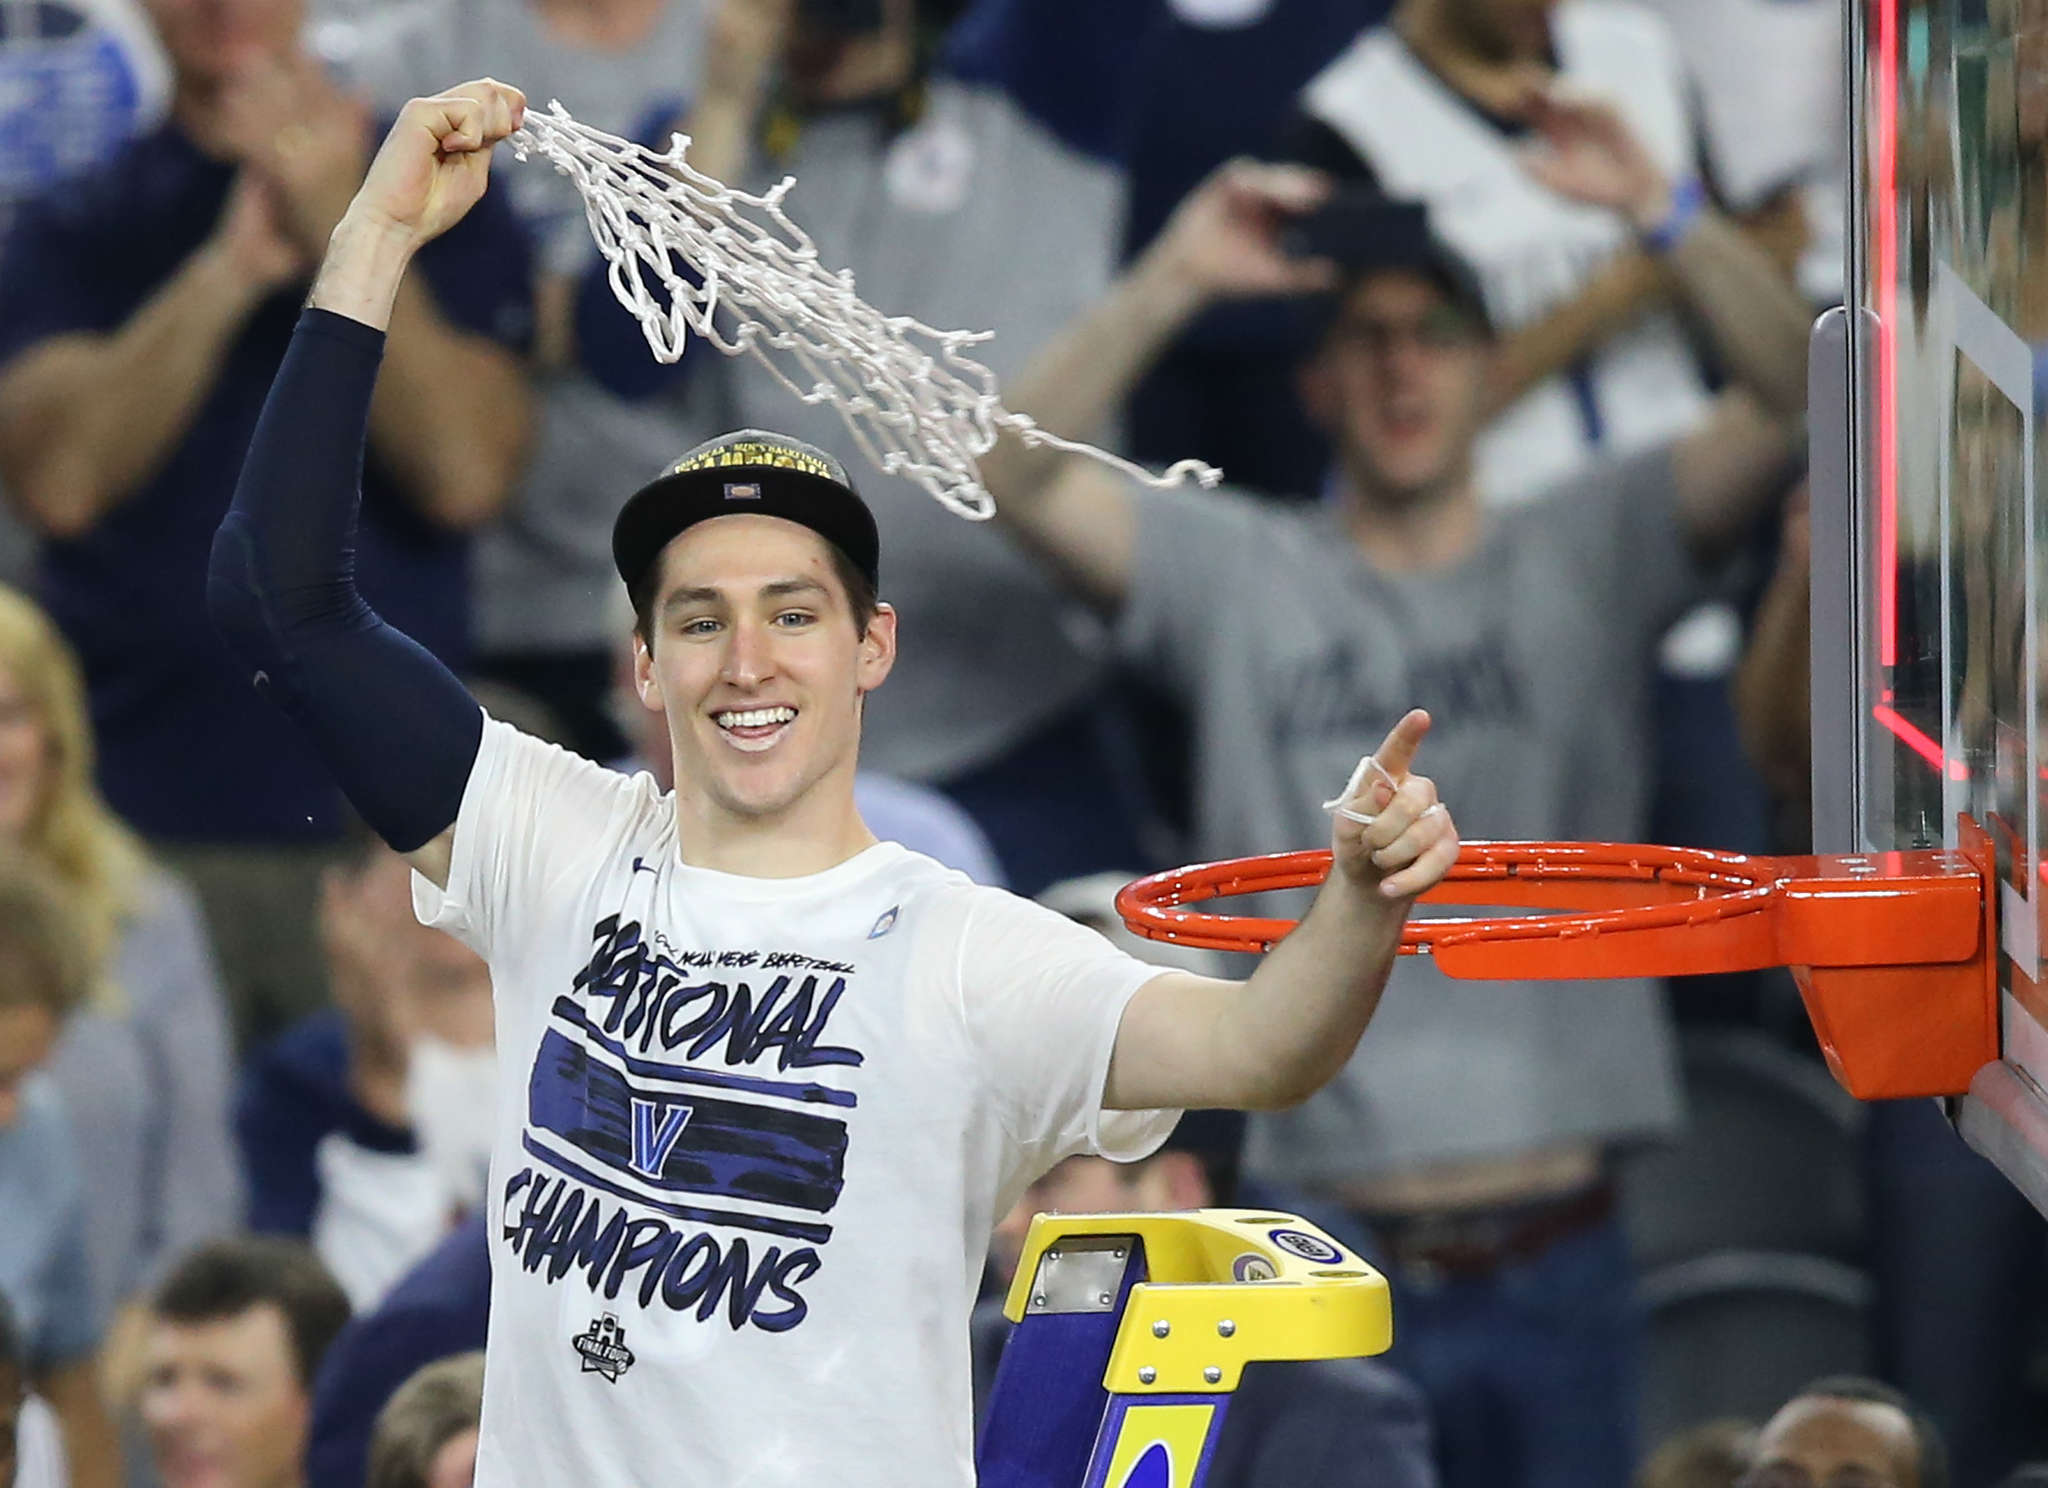 Chris Arcidiacono shows that hard work and patience pay off for Villanova